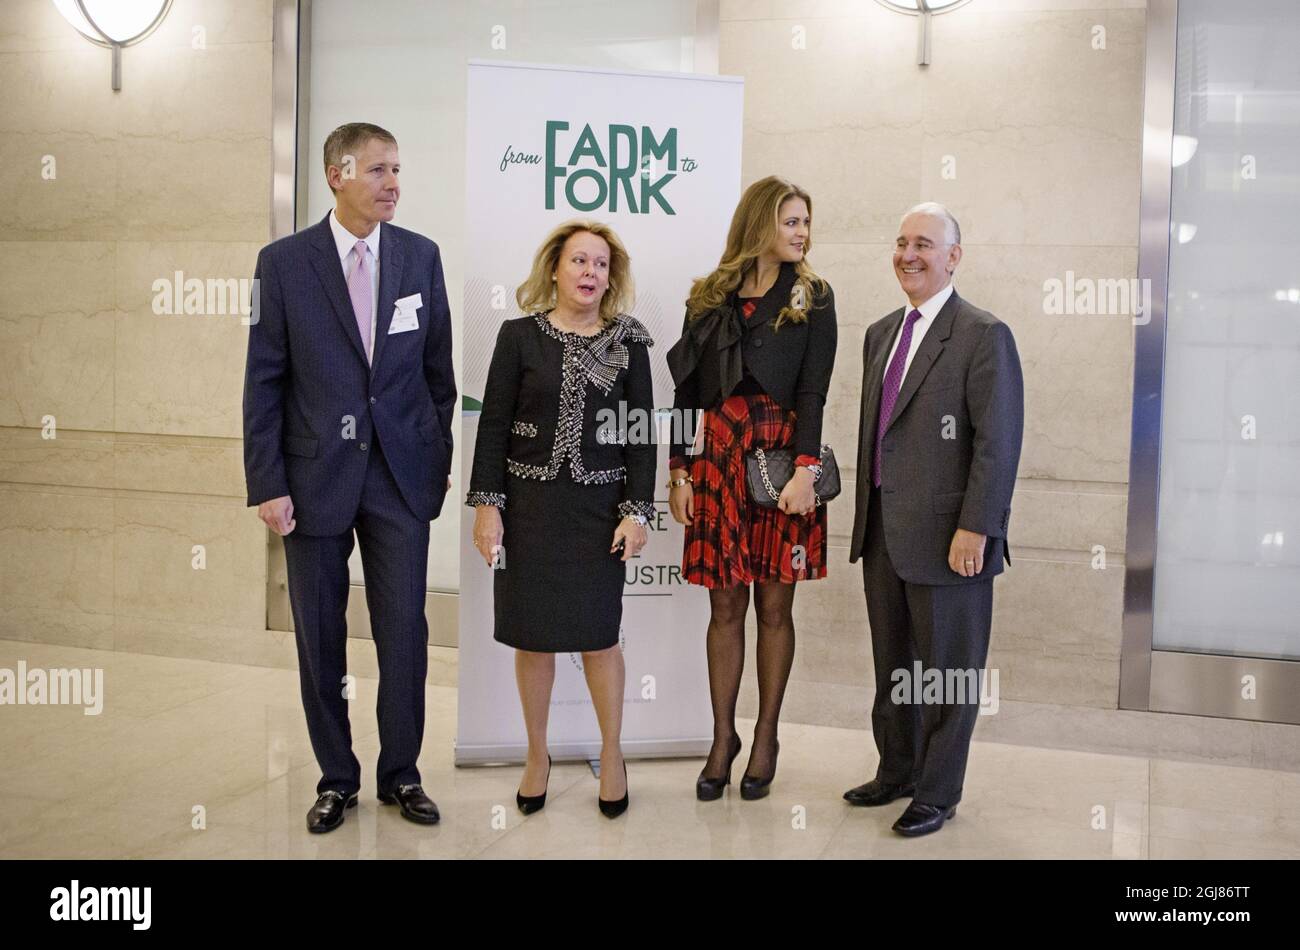 NEW YORK 2013-10-23 From left, Frederick Johansson, SACC (Swedish-American Chamber of Commerce), ReneÃƒÂ© Lundholm, President SACC, Princess Madeleine, Samuel A. di Piazza, Jr., Citigroup, arriving at the summit 'From Farm to Fork' in SACC's auspices in New York on Wednesday October 23, 2013. Foto: Linda Forsell / TT / kod 200  Stock Photo